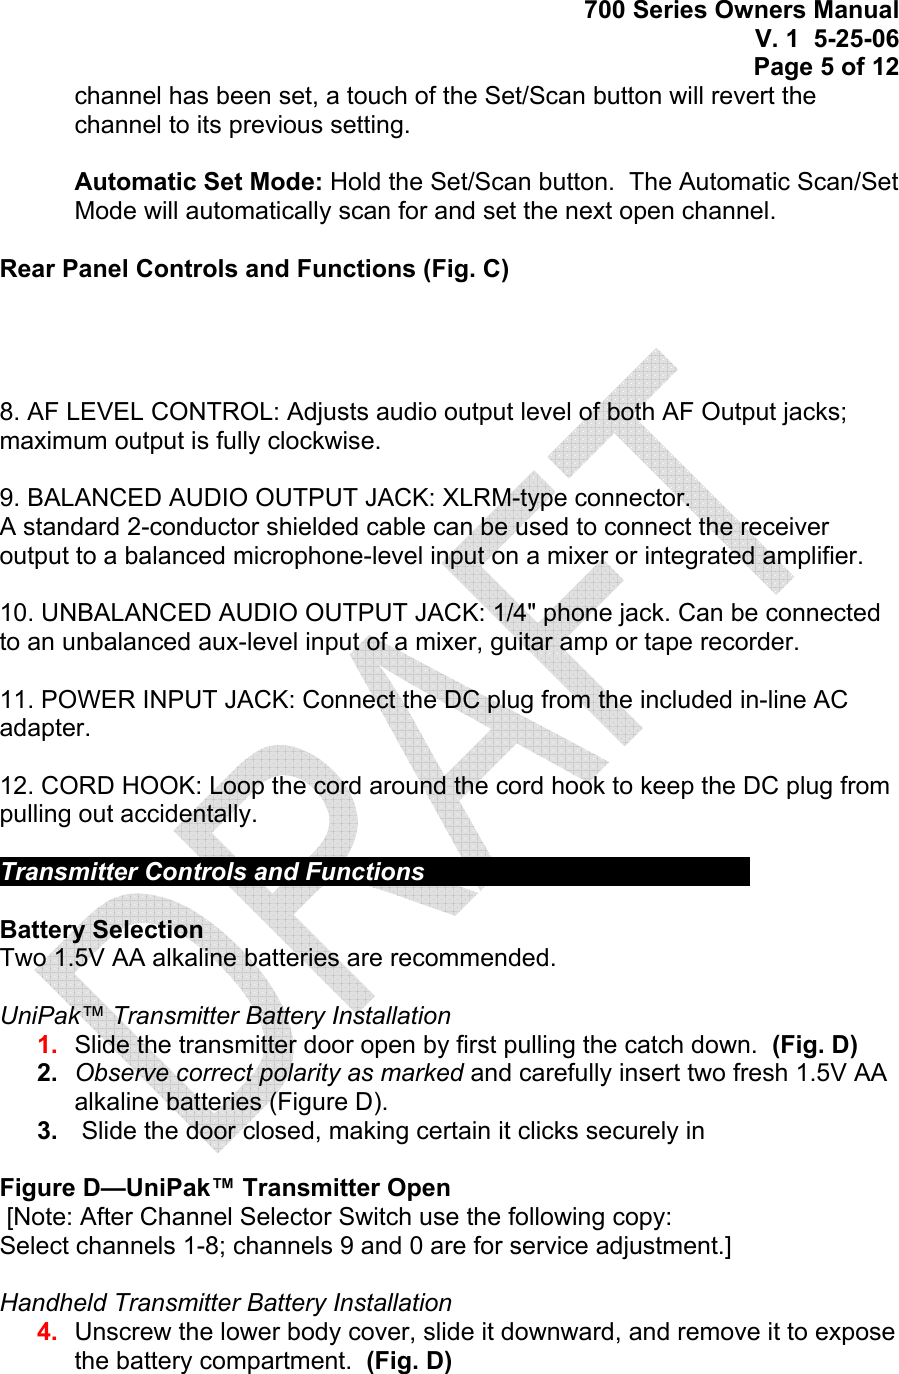 700 Series Owners Manual V. 1  5-25-06 Page 5 of 12  channel has been set, a touch of the Set/Scan button will revert the channel to its previous setting.   Automatic Set Mode: Hold the Set/Scan button.  The Automatic Scan/Set Mode will automatically scan for and set the next open channel.  Rear Panel Controls and Functions (Fig. C)       8. AF LEVEL CONTROL: Adjusts audio output level of both AF Output jacks; maximum output is fully clockwise.  9. BALANCED AUDIO OUTPUT JACK: XLRM-type connector. A standard 2-conductor shielded cable can be used to connect the receiver output to a balanced microphone-level input on a mixer or integrated amplifier.  10. UNBALANCED AUDIO OUTPUT JACK: 1/4&quot; phone jack. Can be connected to an unbalanced aux-level input of a mixer, guitar amp or tape recorder.  11. POWER INPUT JACK: Connect the DC plug from the included in-line AC adapter.  12. CORD HOOK: Loop the cord around the cord hook to keep the DC plug from pulling out accidentally.  Transmitter Controls and Functions          Battery Selection Two 1.5V AA alkaline batteries are recommended.  UniPak™ Transmitter Battery Installation  1.  Slide the transmitter door open by first pulling the catch down.  (Fig. D)  2.  Observe correct polarity as marked and carefully insert two fresh 1.5V AA alkaline batteries (Figure D). 3.   Slide the door closed, making certain it clicks securely in  Figure D—UniPak™ Transmitter Open  [Note: After Channel Selector Switch use the following copy:  Select channels 1-8; channels 9 and 0 are for service adjustment.]  Handheld Transmitter Battery Installation  4.  Unscrew the lower body cover, slide it downward, and remove it to expose the battery compartment.  (Fig. D)   